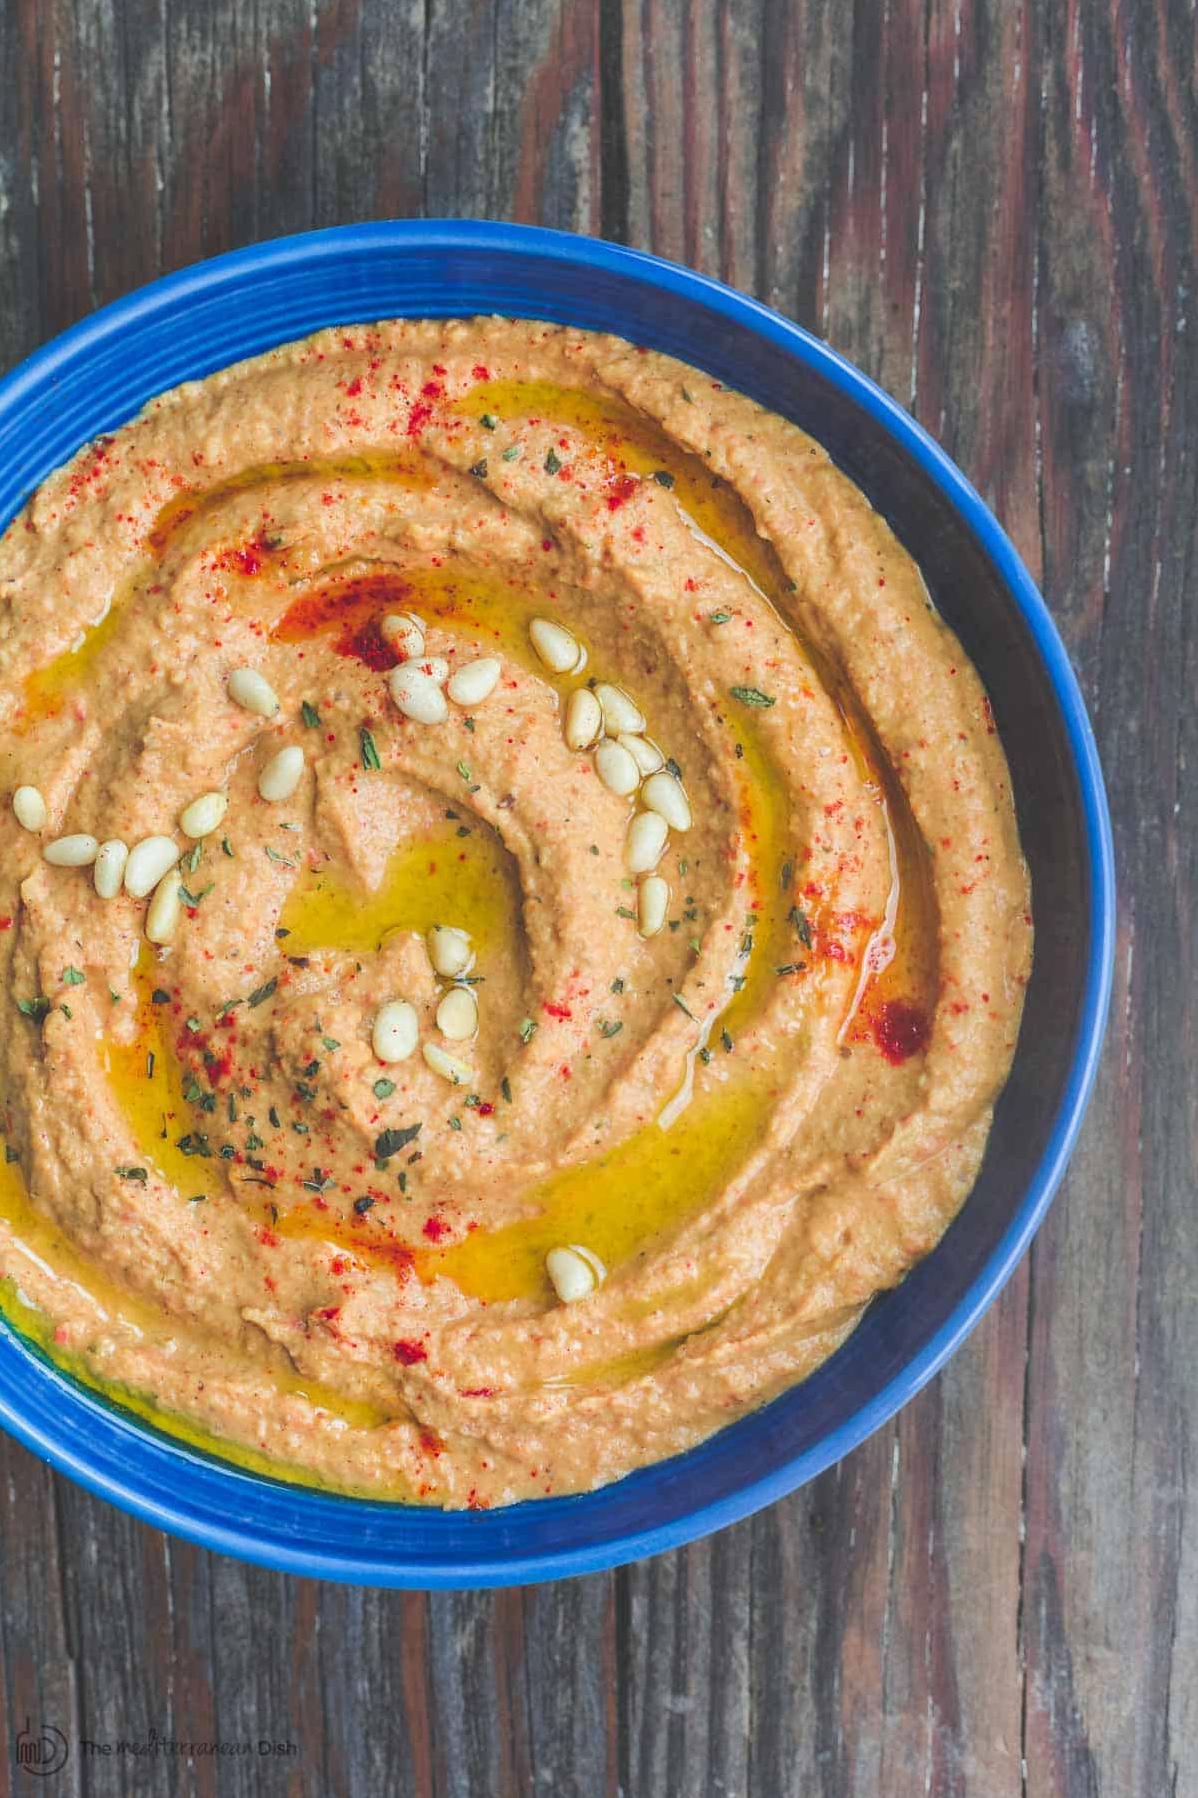  Creamy and Delicious Hummus with a Kick